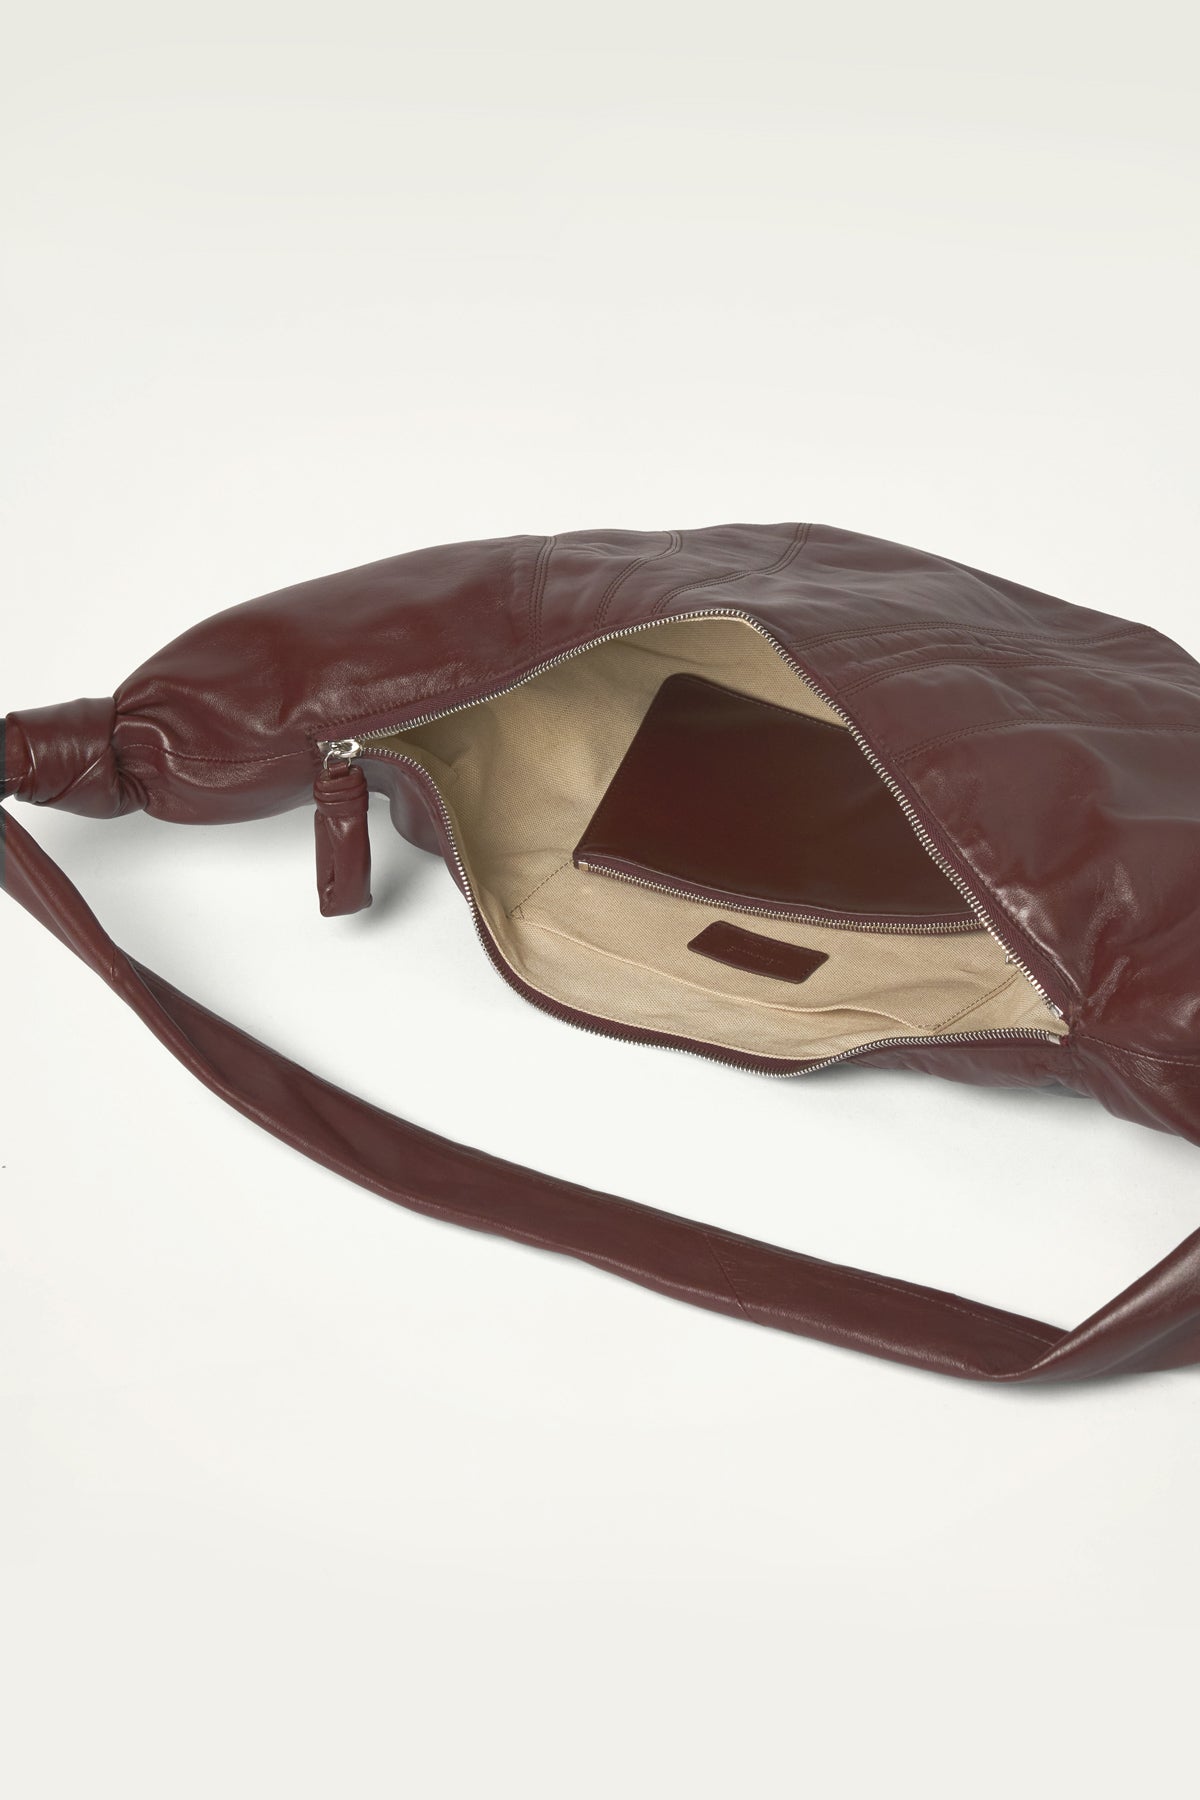 Lemaire  —  Large Croissant Bag / Roasted Pecan